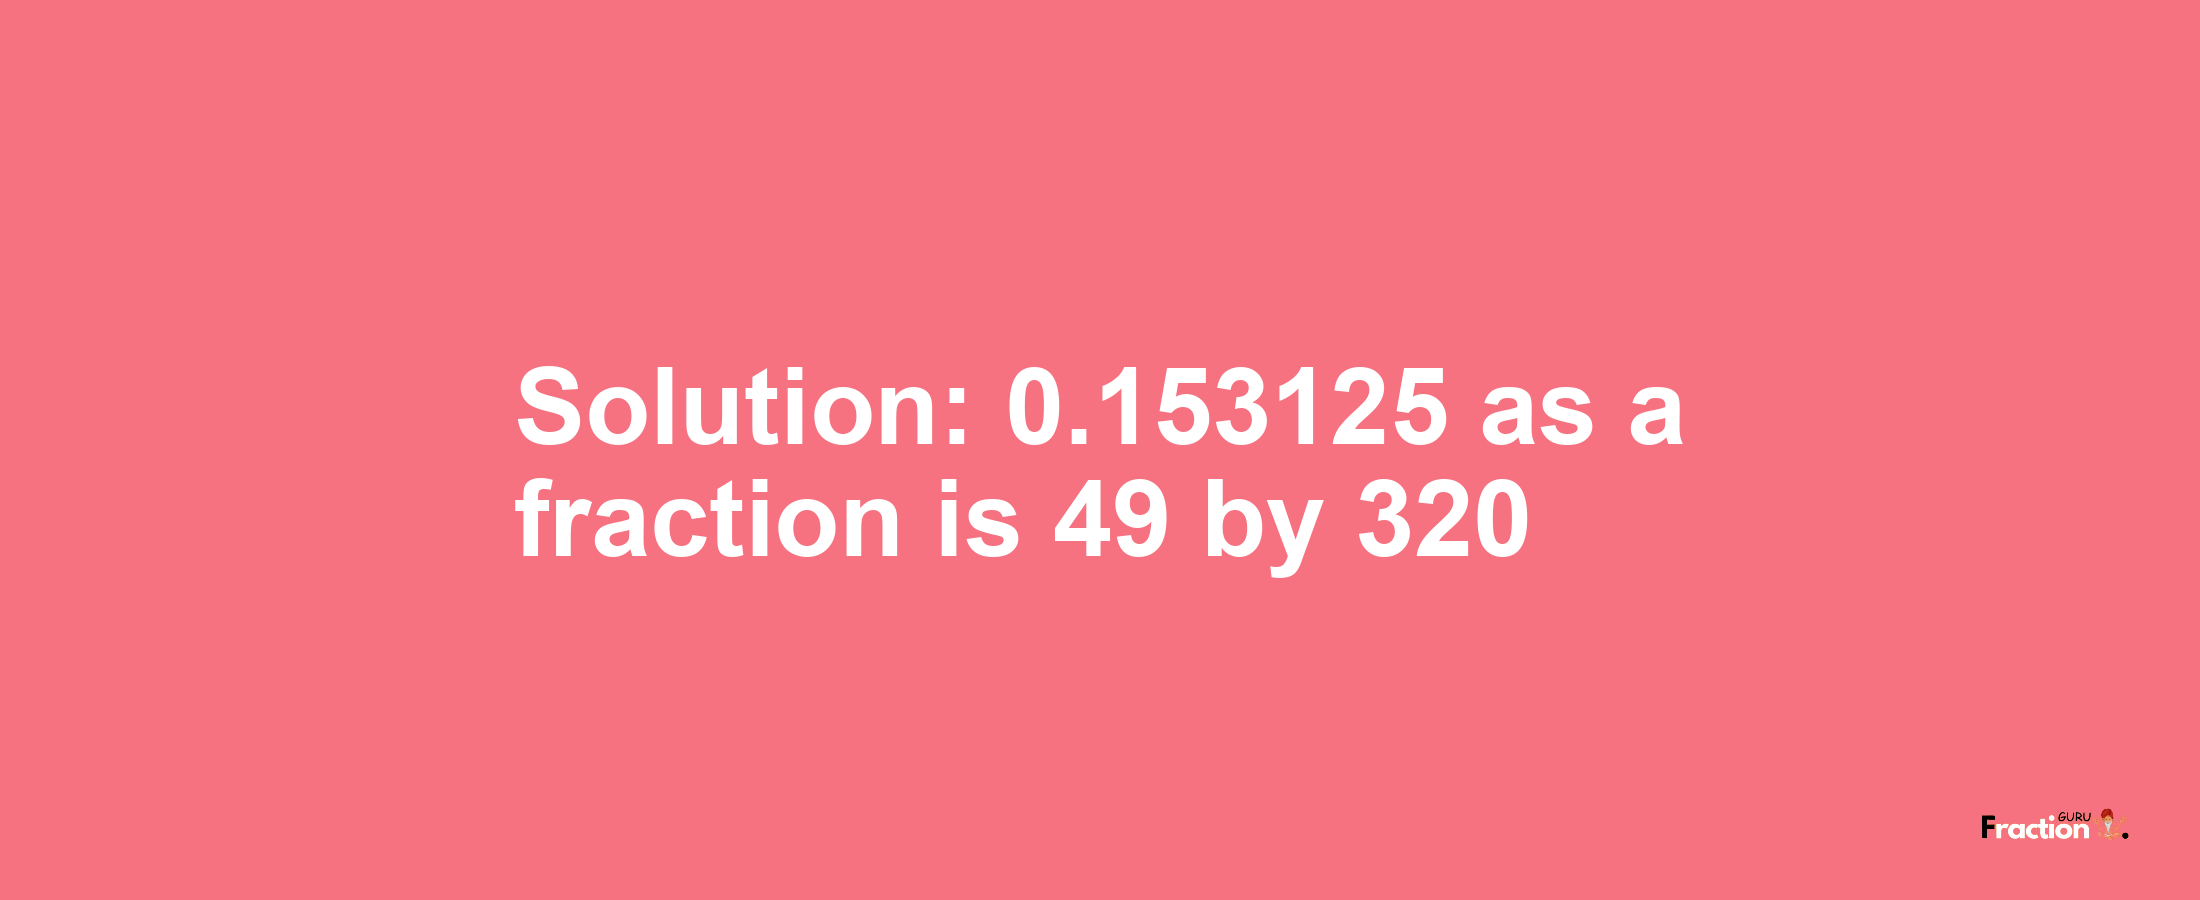 Solution:0.153125 as a fraction is 49/320